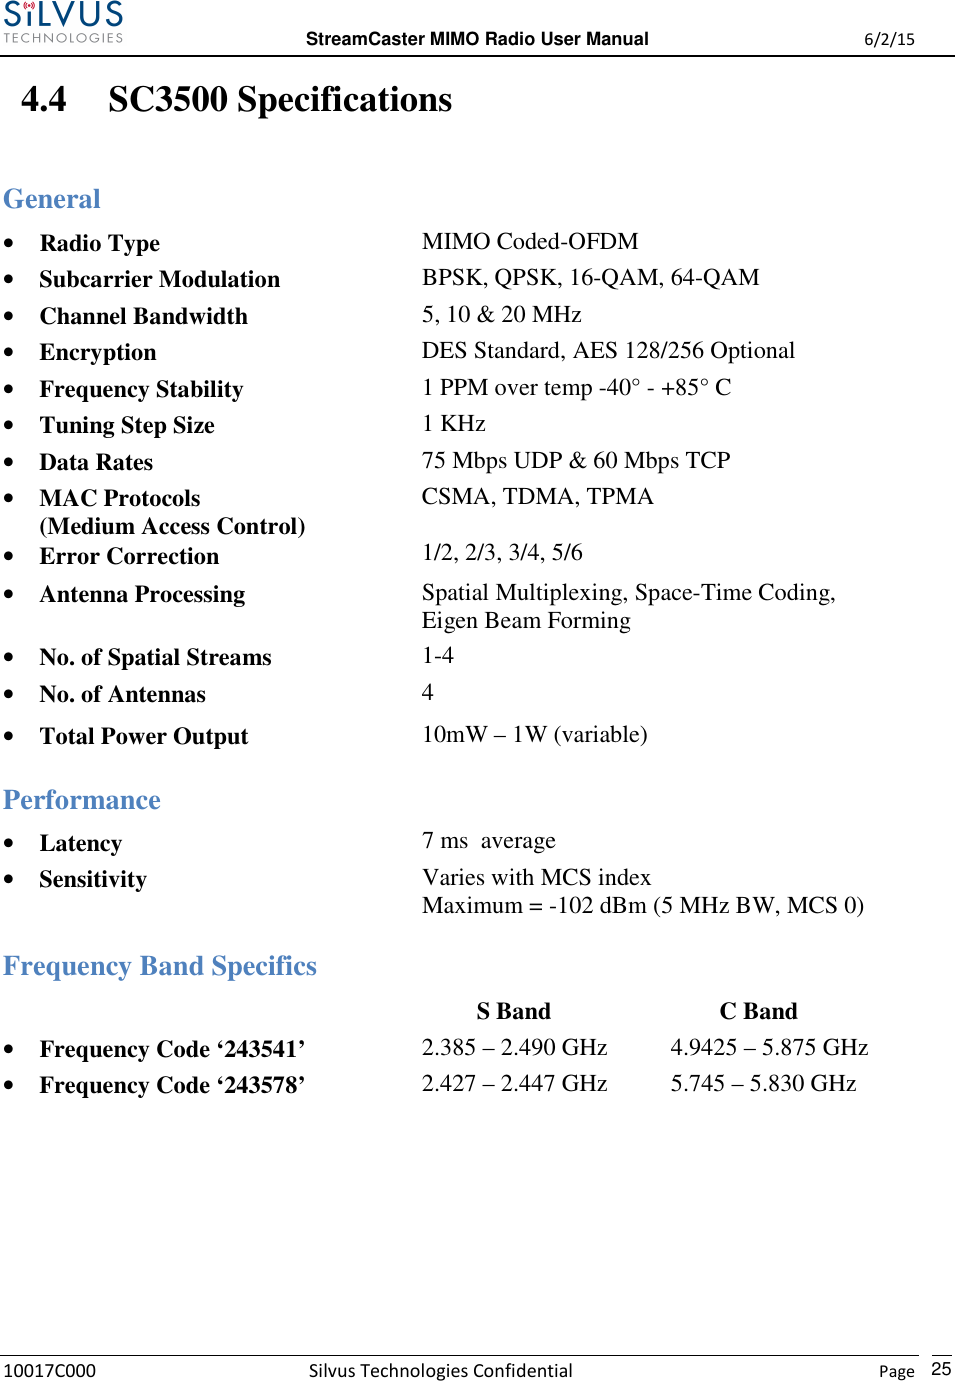  StreamCaster MIMO Radio User Manual  6/2/15 10017C000 Silvus Technologies Confidential    Page   25 4.4 SC3500 Specifications General • Radio Type  MIMO Coded-OFDM • Subcarrier Modulation  BPSK, QPSK, 16-QAM, 64-QAM • Channel Bandwidth  5, 10 &amp; 20 MHz • Encryption  DES Standard, AES 128/256 Optional • Frequency Stability  1 PPM over temp -40° - +85° C • Tuning Step Size  1 KHz • Data Rates  75 Mbps UDP &amp; 60 Mbps TCP • MAC Protocols (Medium Access Control) • Error Correction CSMA, TDMA, TPMA  1/2, 2/3, 3/4, 5/6 • Antenna Processing  Spatial Multiplexing, Space-Time Coding, Eigen Beam Forming • No. of Spatial Streams  1-4 • No. of Antennas  4 • Total Power Output  10mW – 1W (variable)  Performance • Latency  7 ms  average • Sensitivity  Varies with MCS index Maximum = -102 dBm (5 MHz BW, MCS 0)  Frequency Band Specifics            S Band          C Band • Frequency Code ‘243541’ 2.385 – 2.490 GHz 4.960 – 2.385 – 2.490 GHz  4.9425 – 5.875 GHz • Frequency Code ‘243578’  2.427 – 2.447 GHz  5.745 – 5.830 GHz  